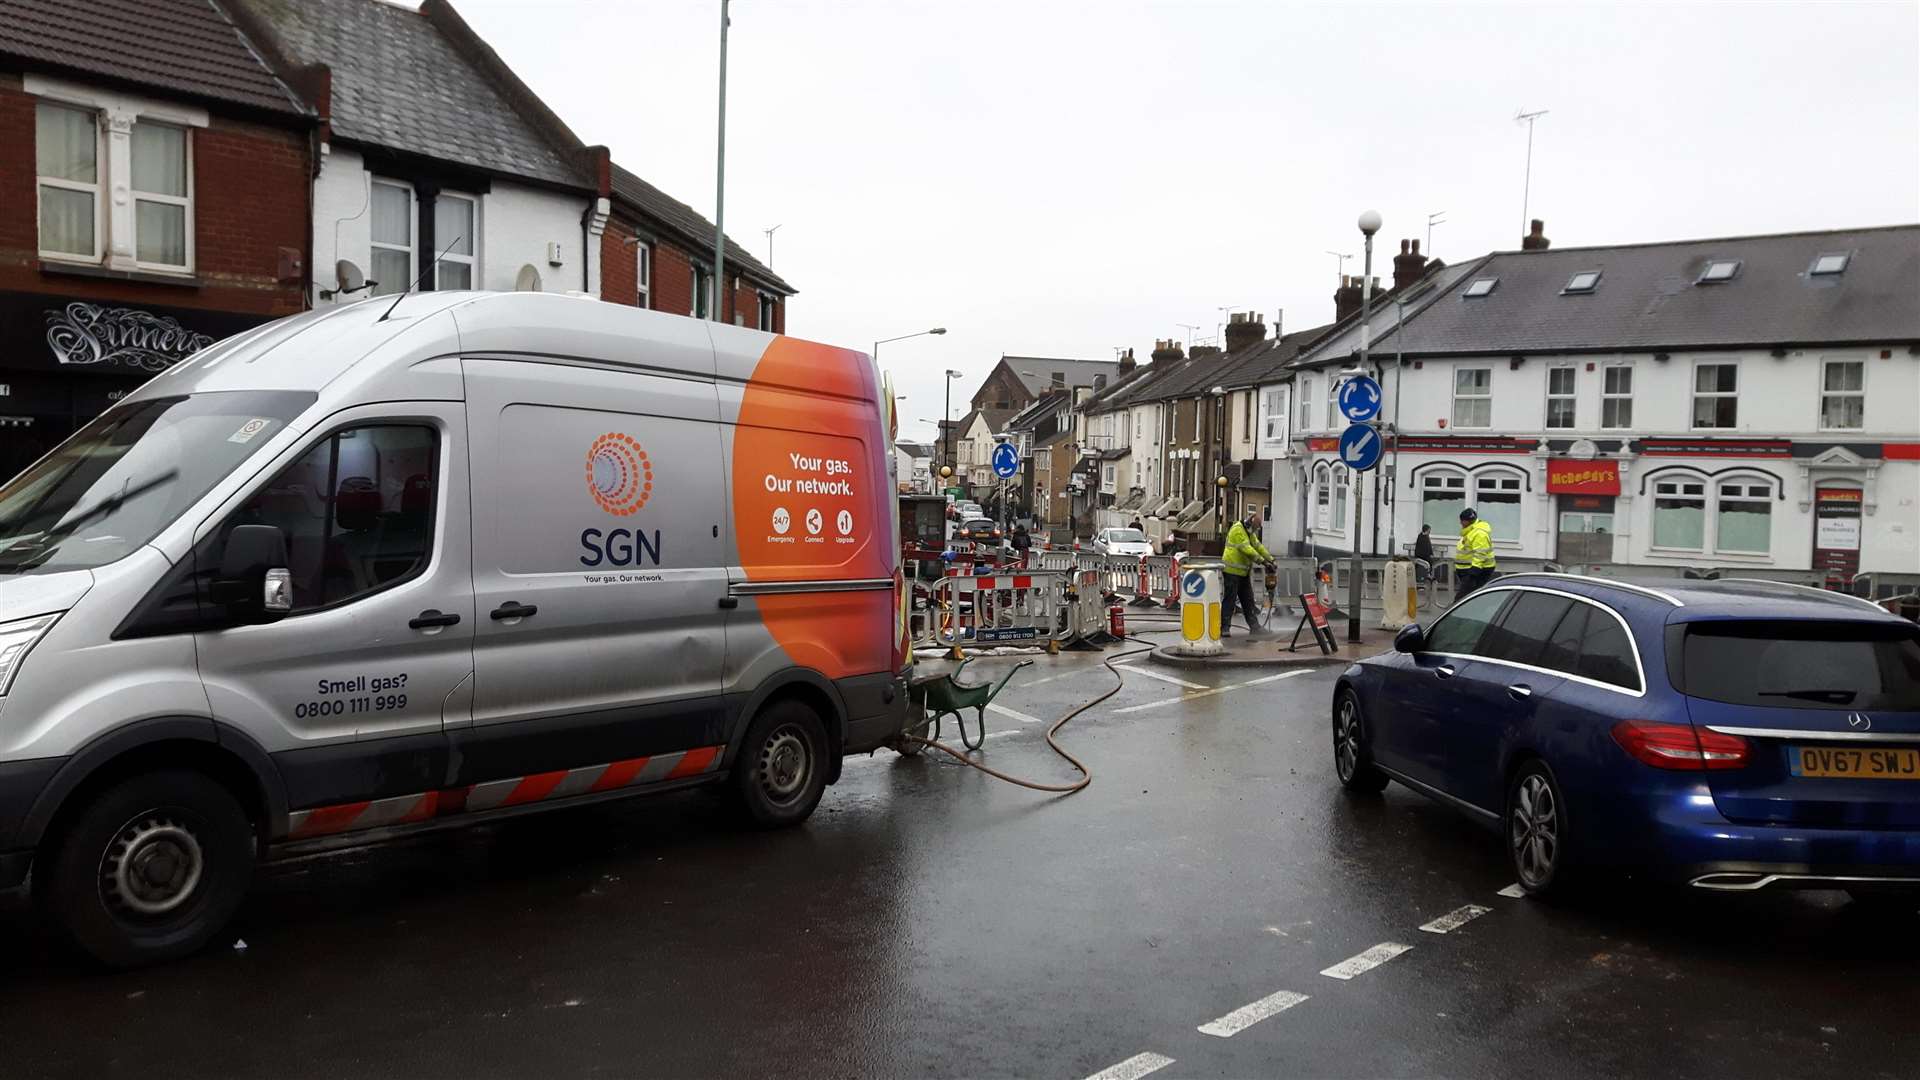 SGN gas network engineers were on hand to help (5657841)